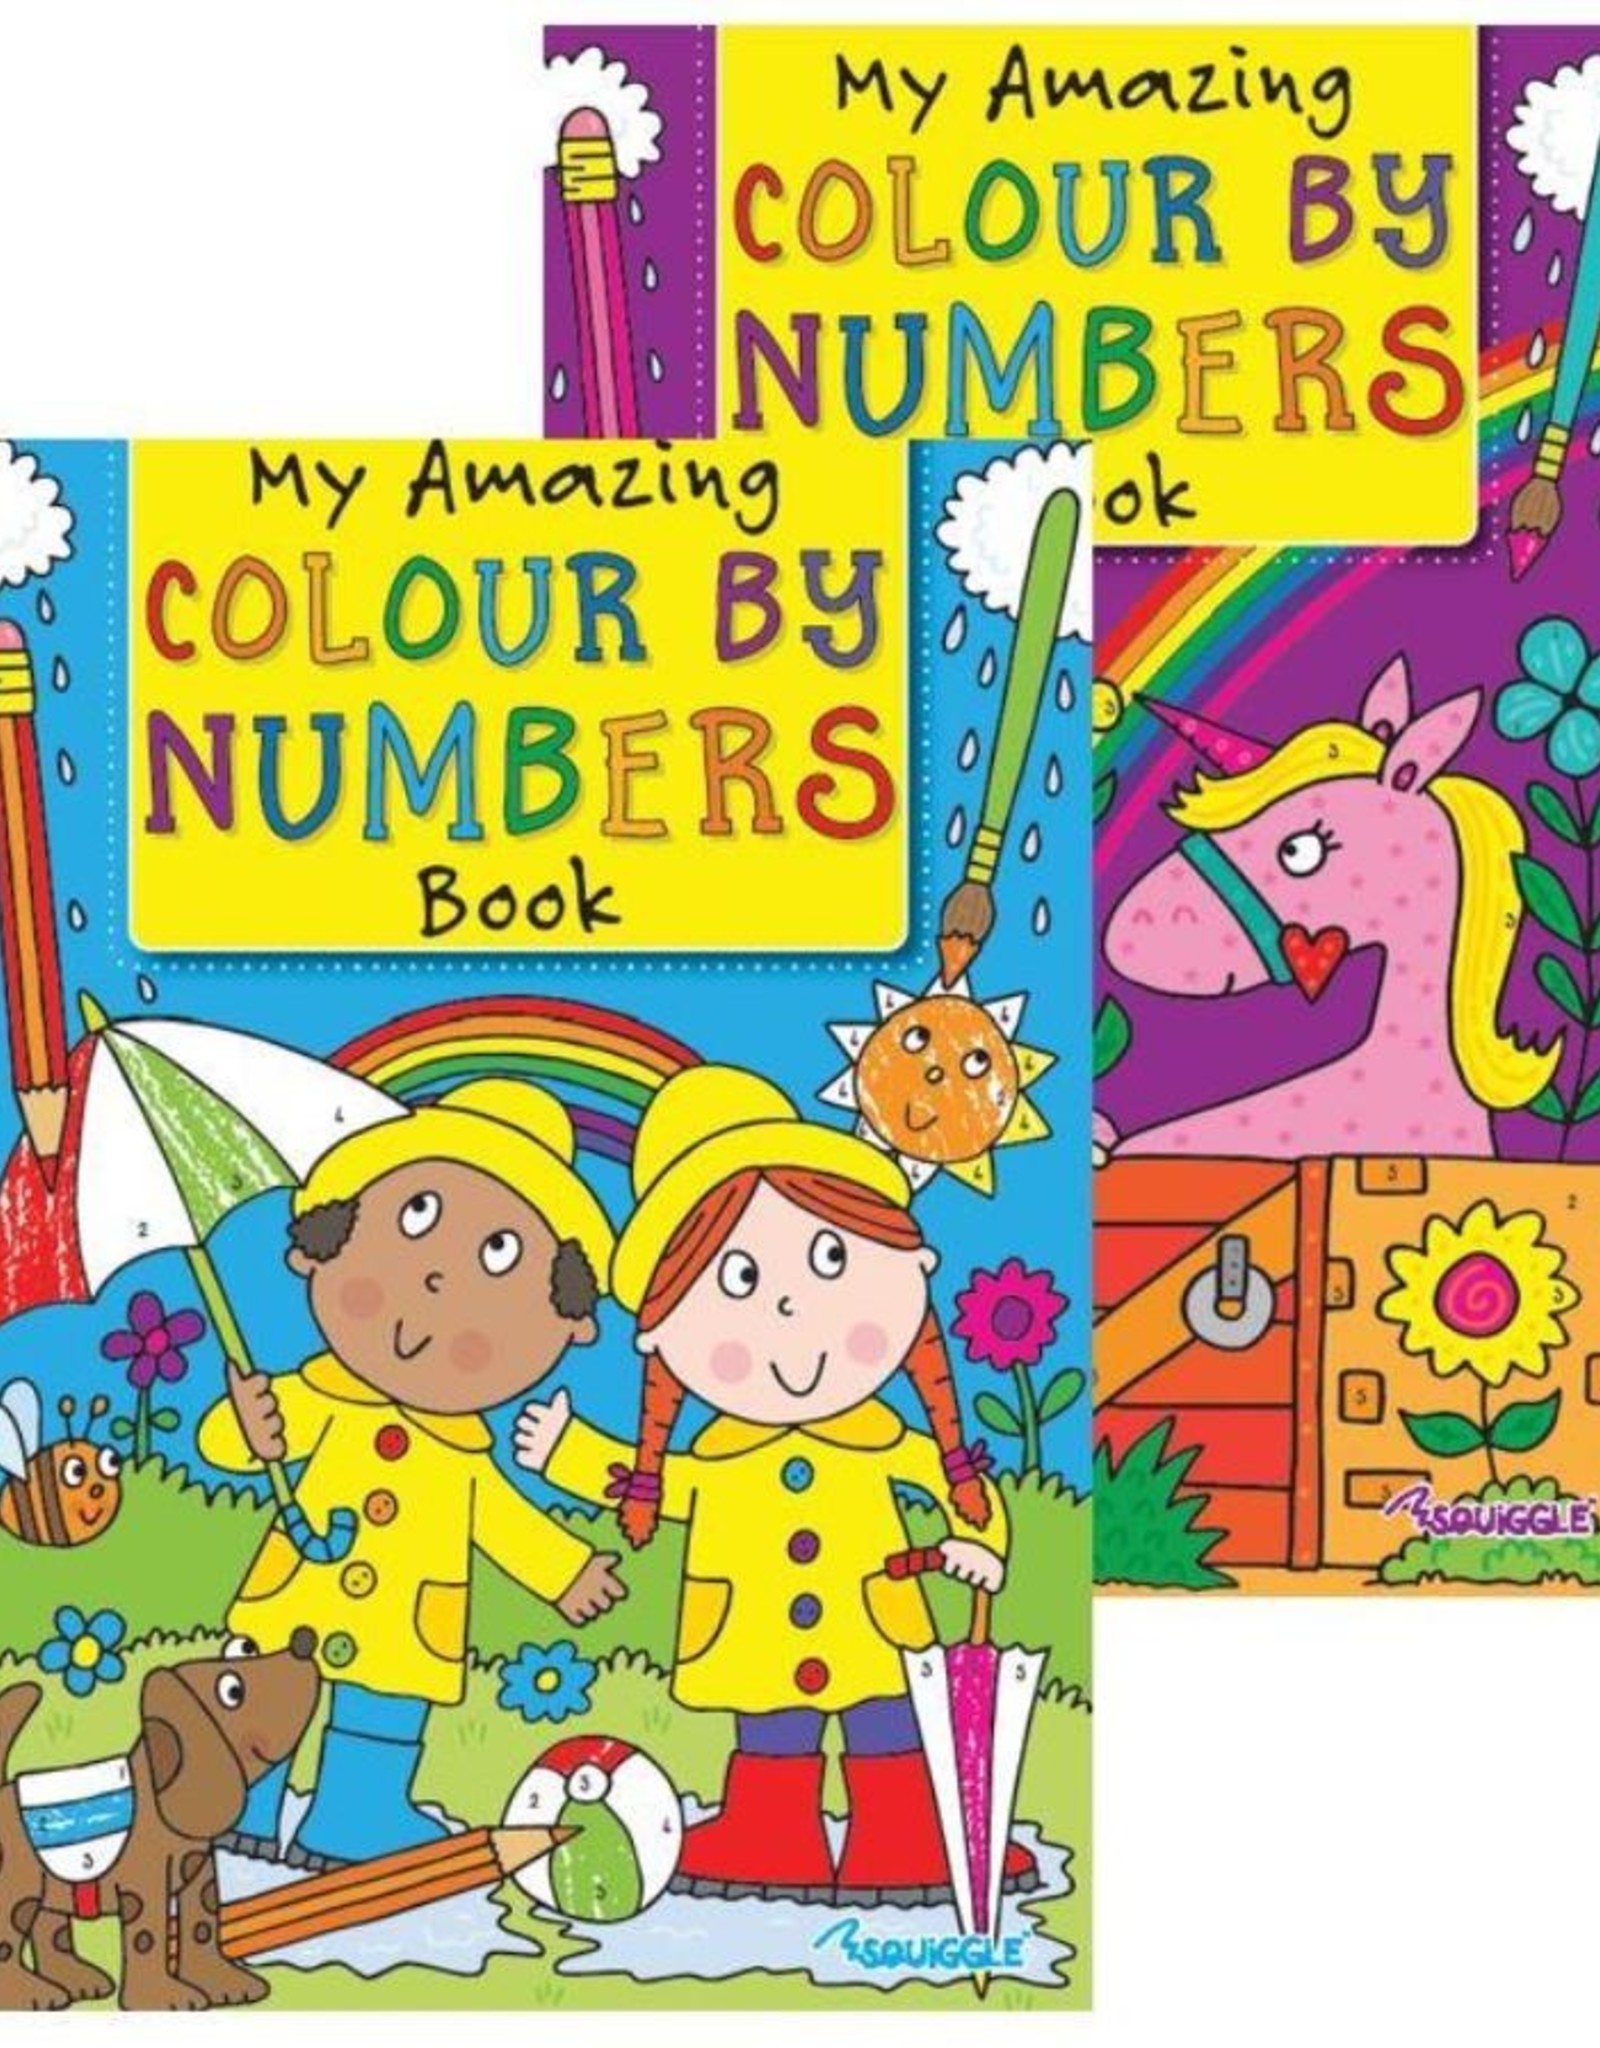 Colour by Numbers Book